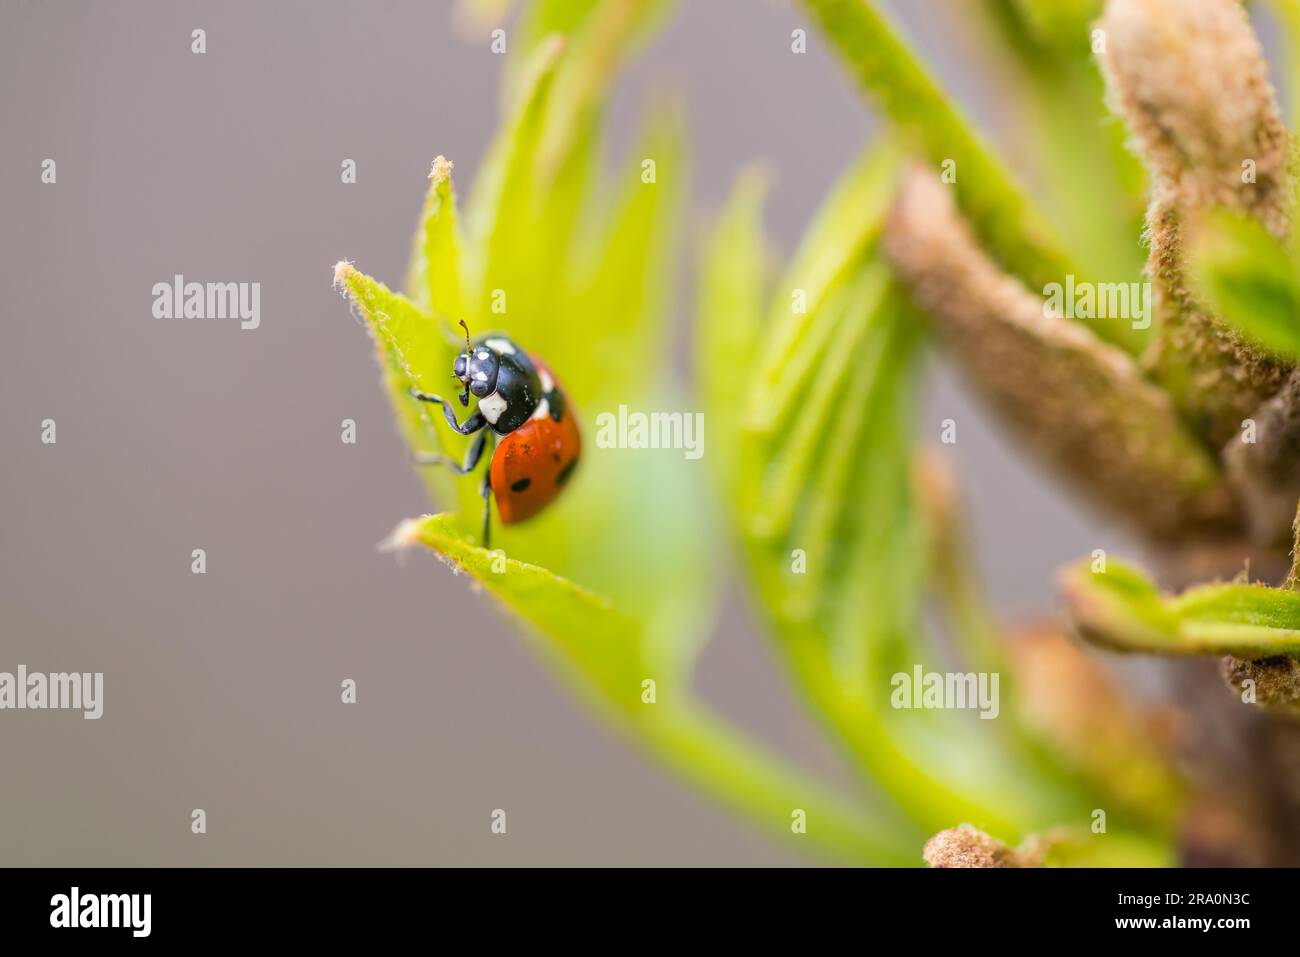 A funny red and black Ladybug on a green leaf in the garden during spring Stock Photo